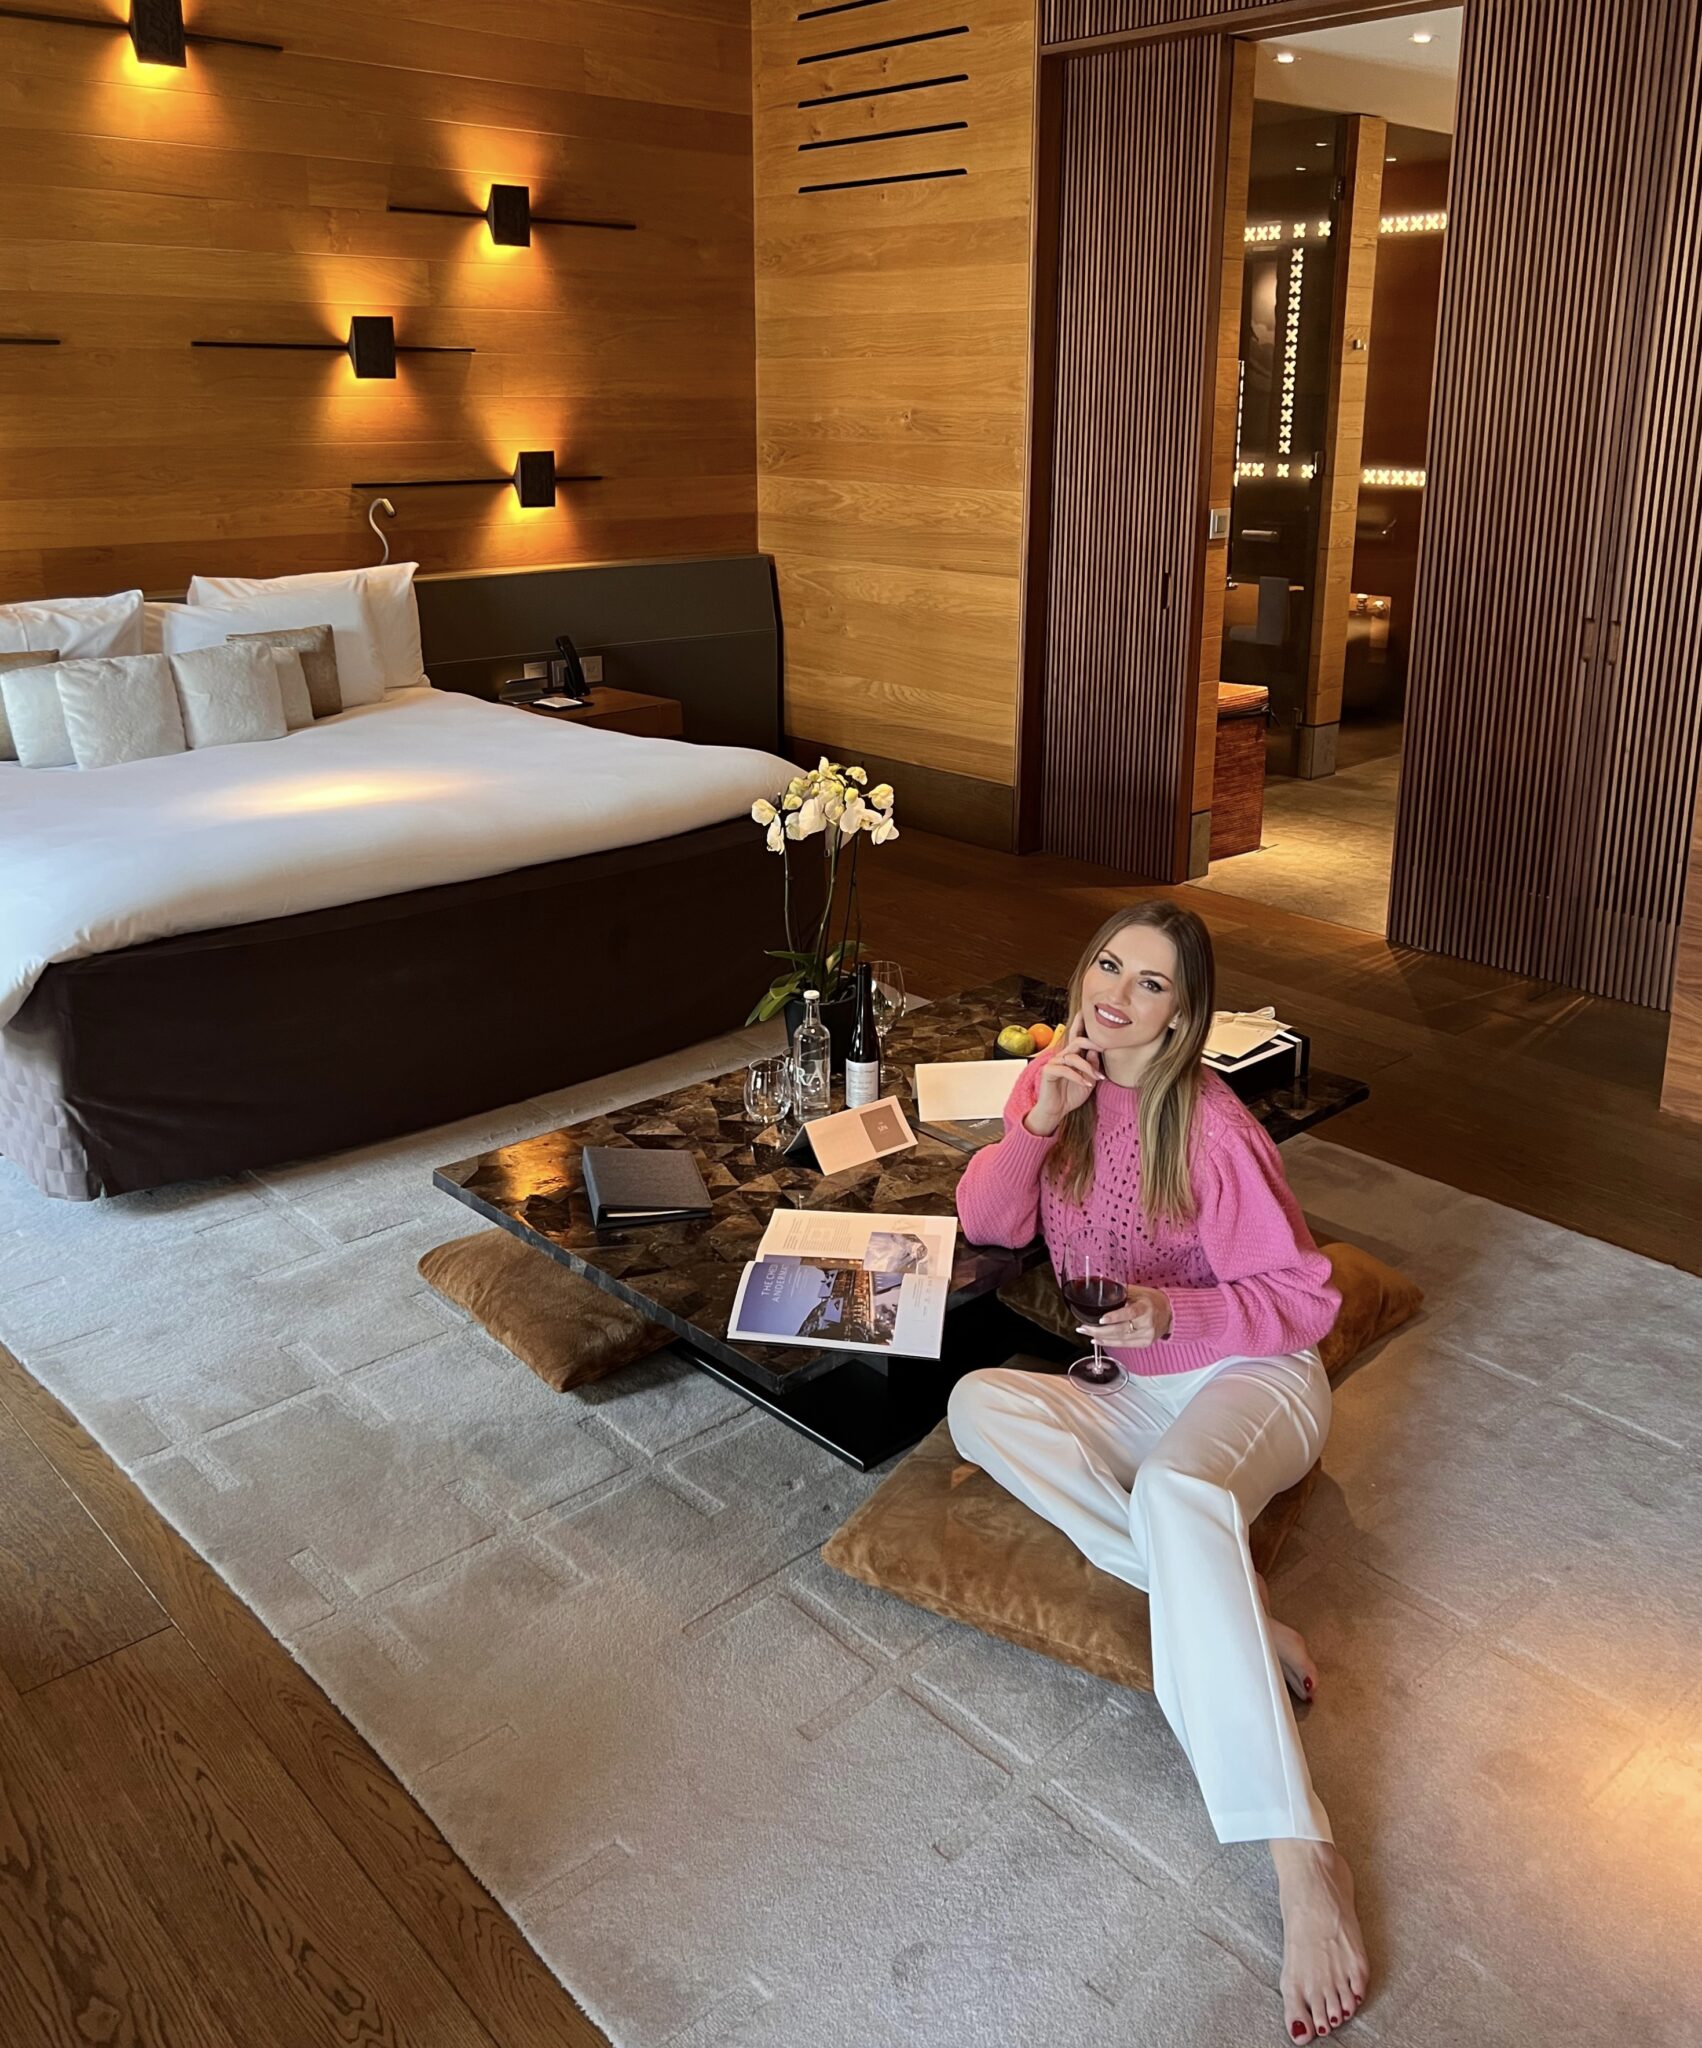 THE CHEDI ANDERMATT - Understated Luxury in the Swiss Alps. Review of The Chedi Hotel in Andermatt, number 1 in Switzerland. 7